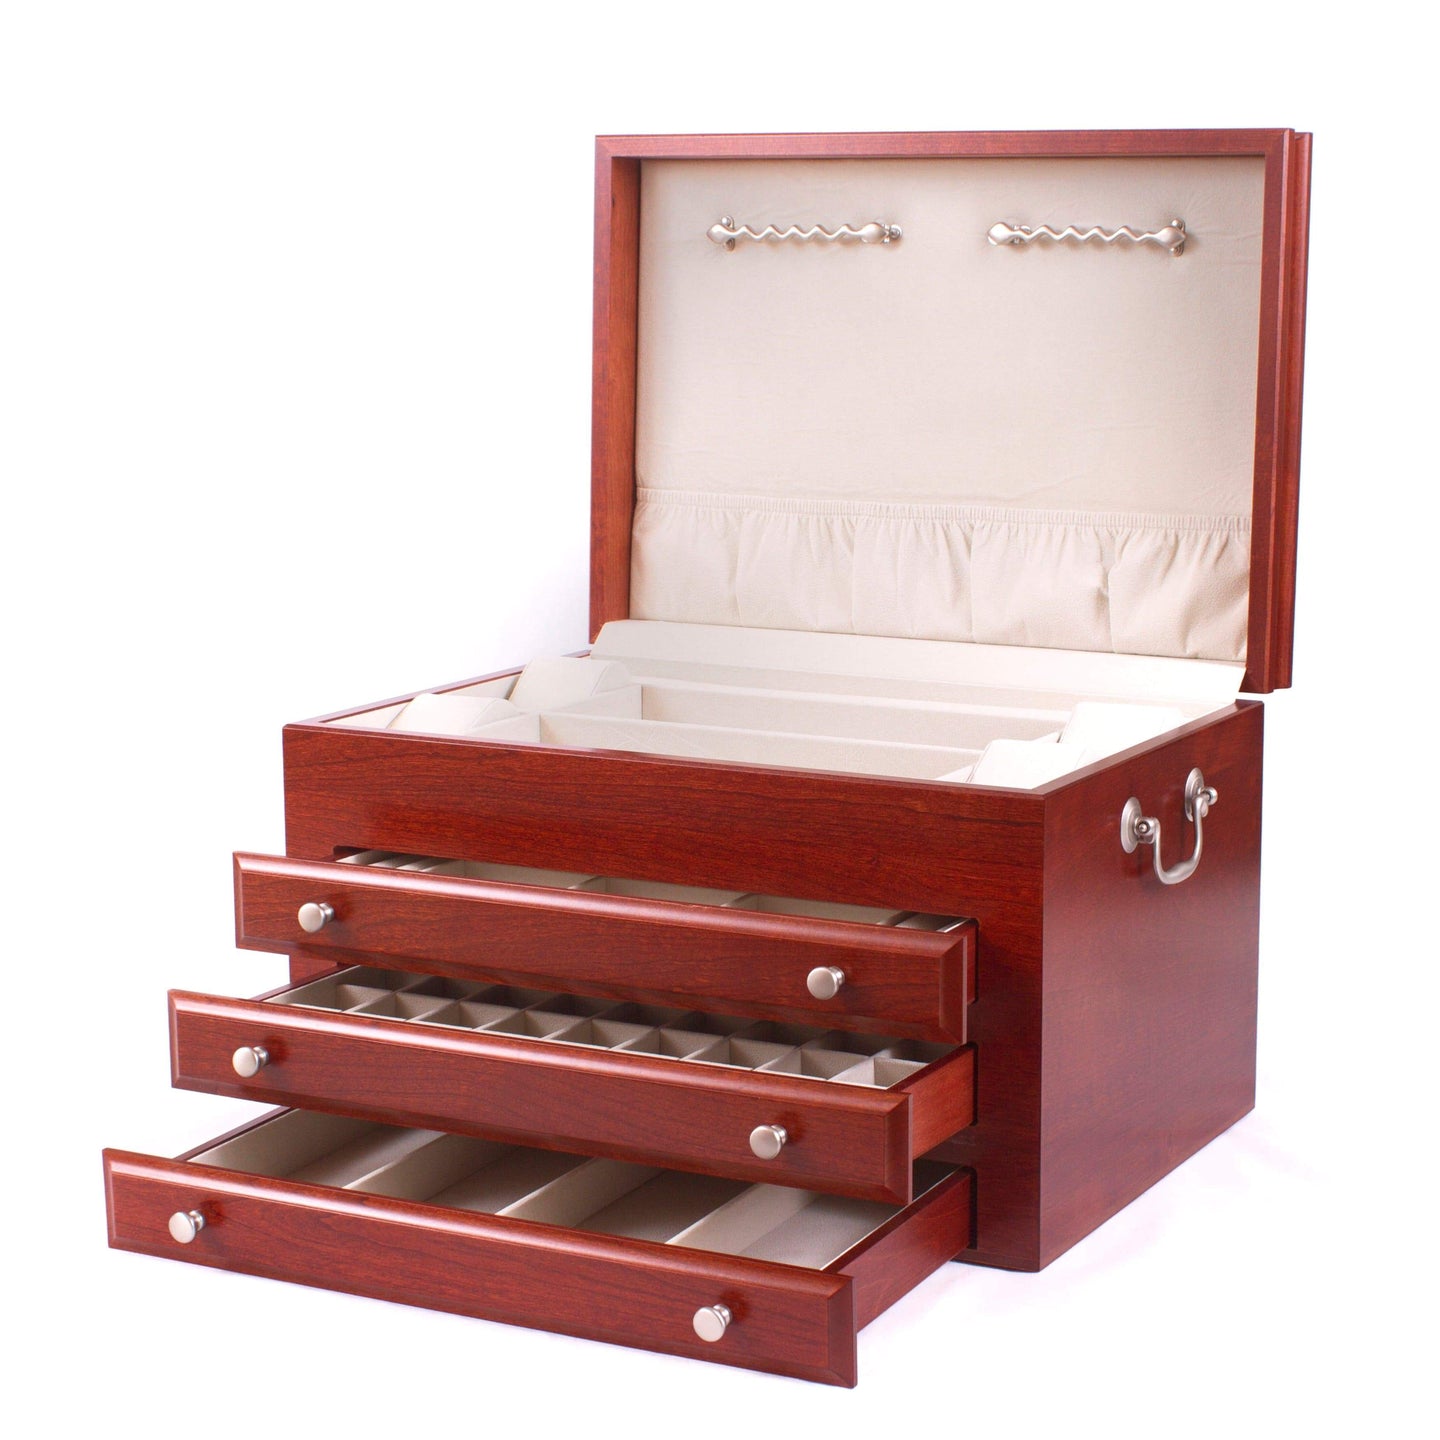 American Chest - Majestic Jewelry Chest, Solid American Cherry Hardwood - Watch Winder Pros